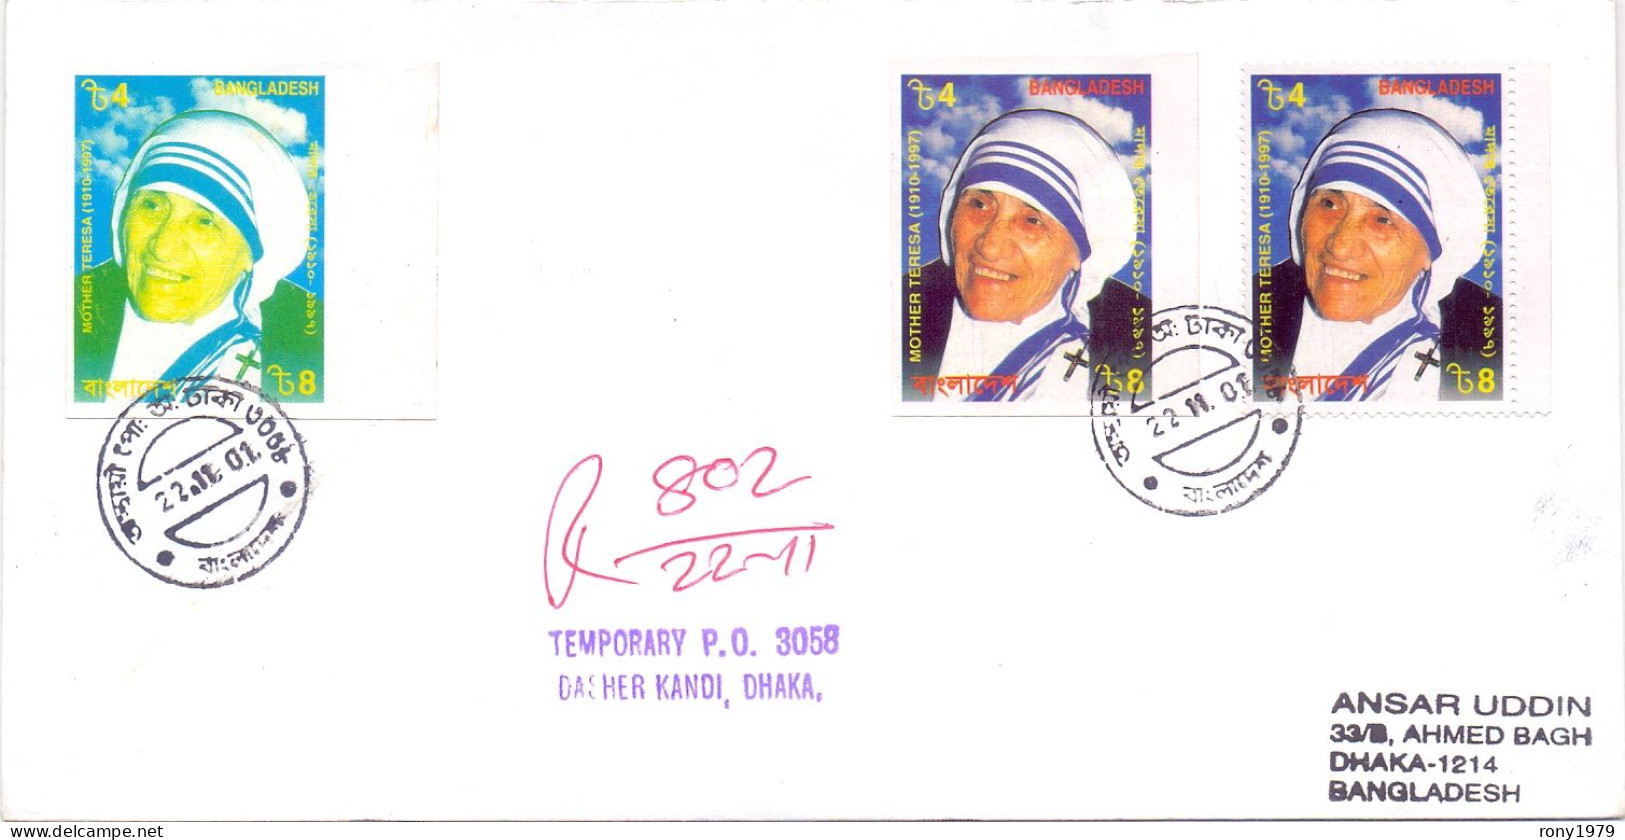 2001 BANGLADESH Mother Teresa PERF IMPERF & IMPERF PROOF On Inland Registered Cover 2 RARE - Mère Teresa